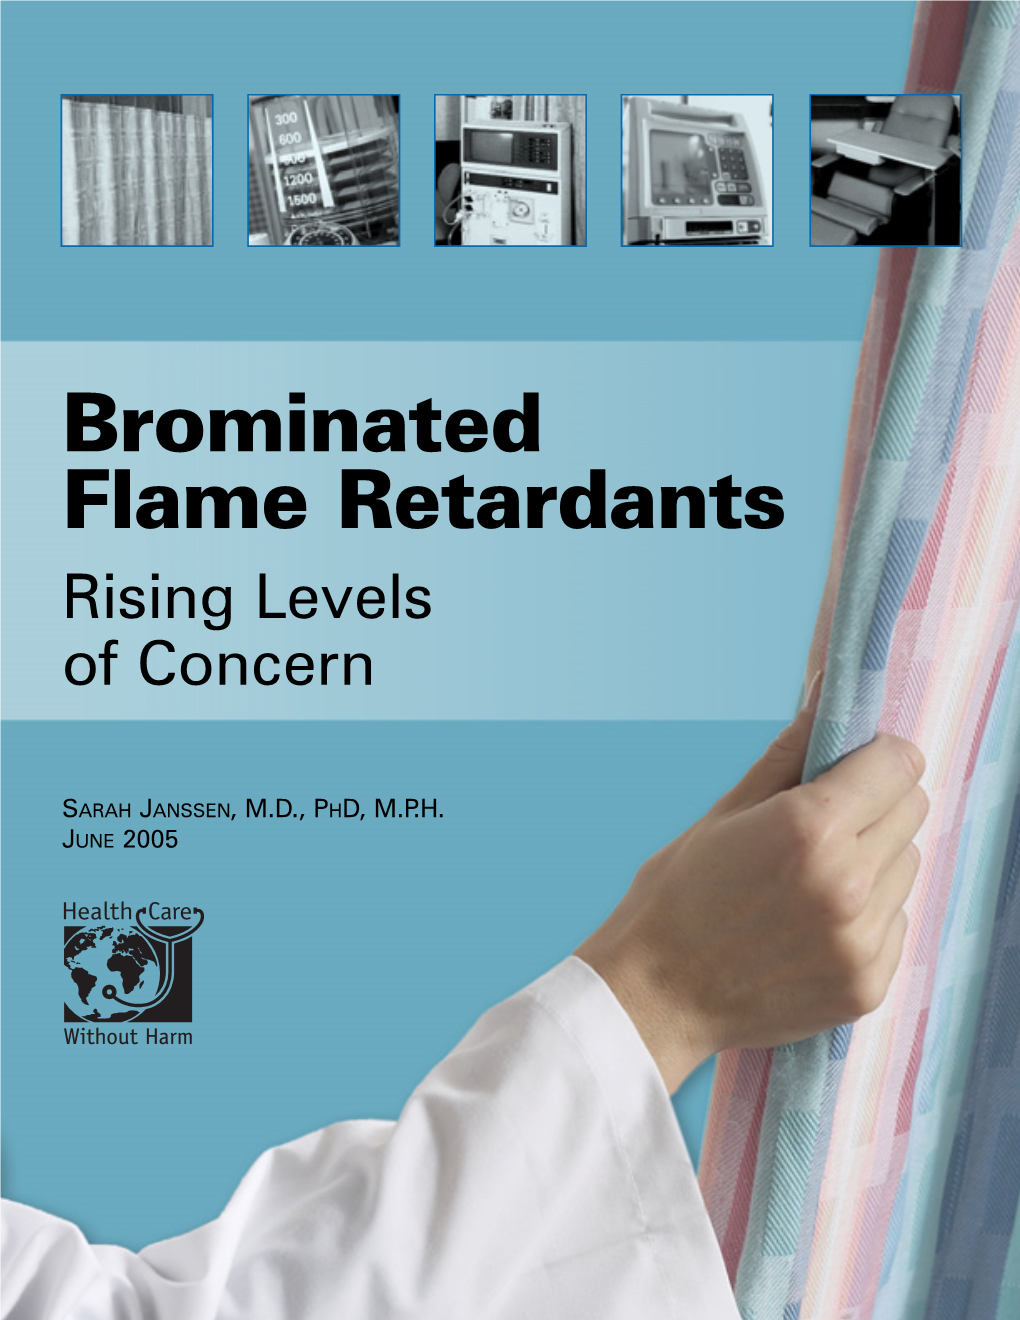 Brominated Flame Retardants Rising Levels of Concern